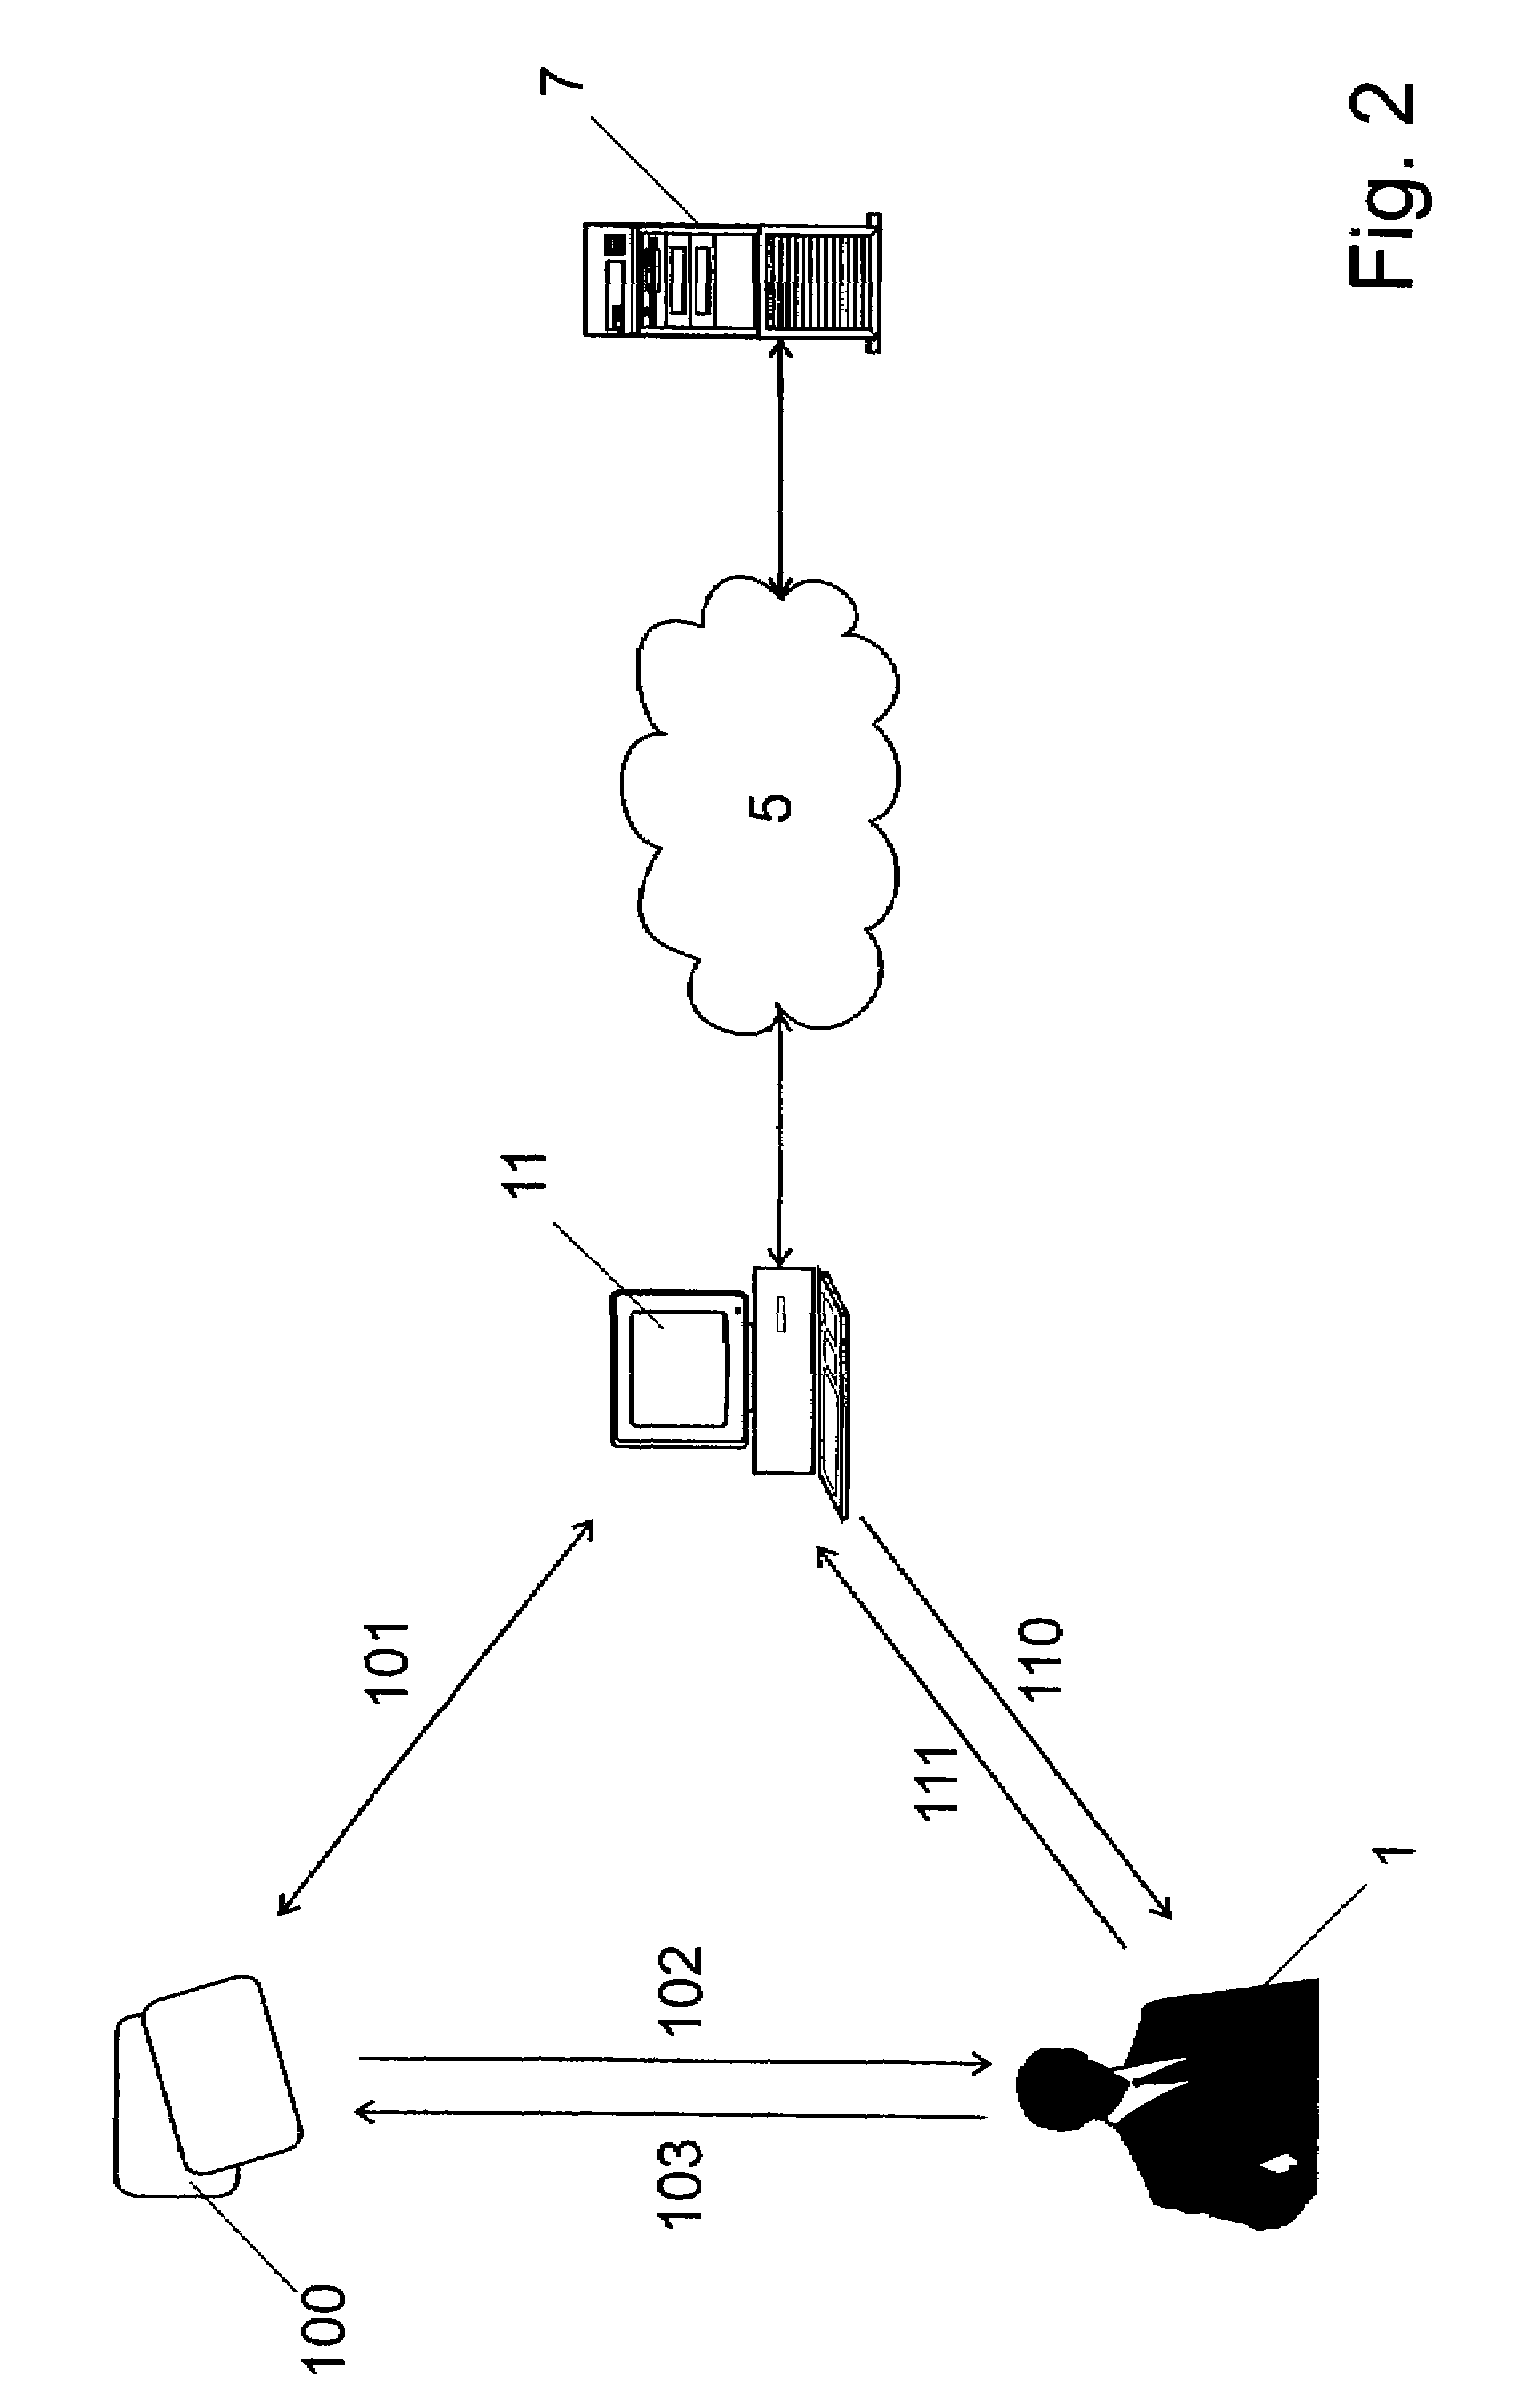 Method for securing communications between a terminal and an additional user equipment